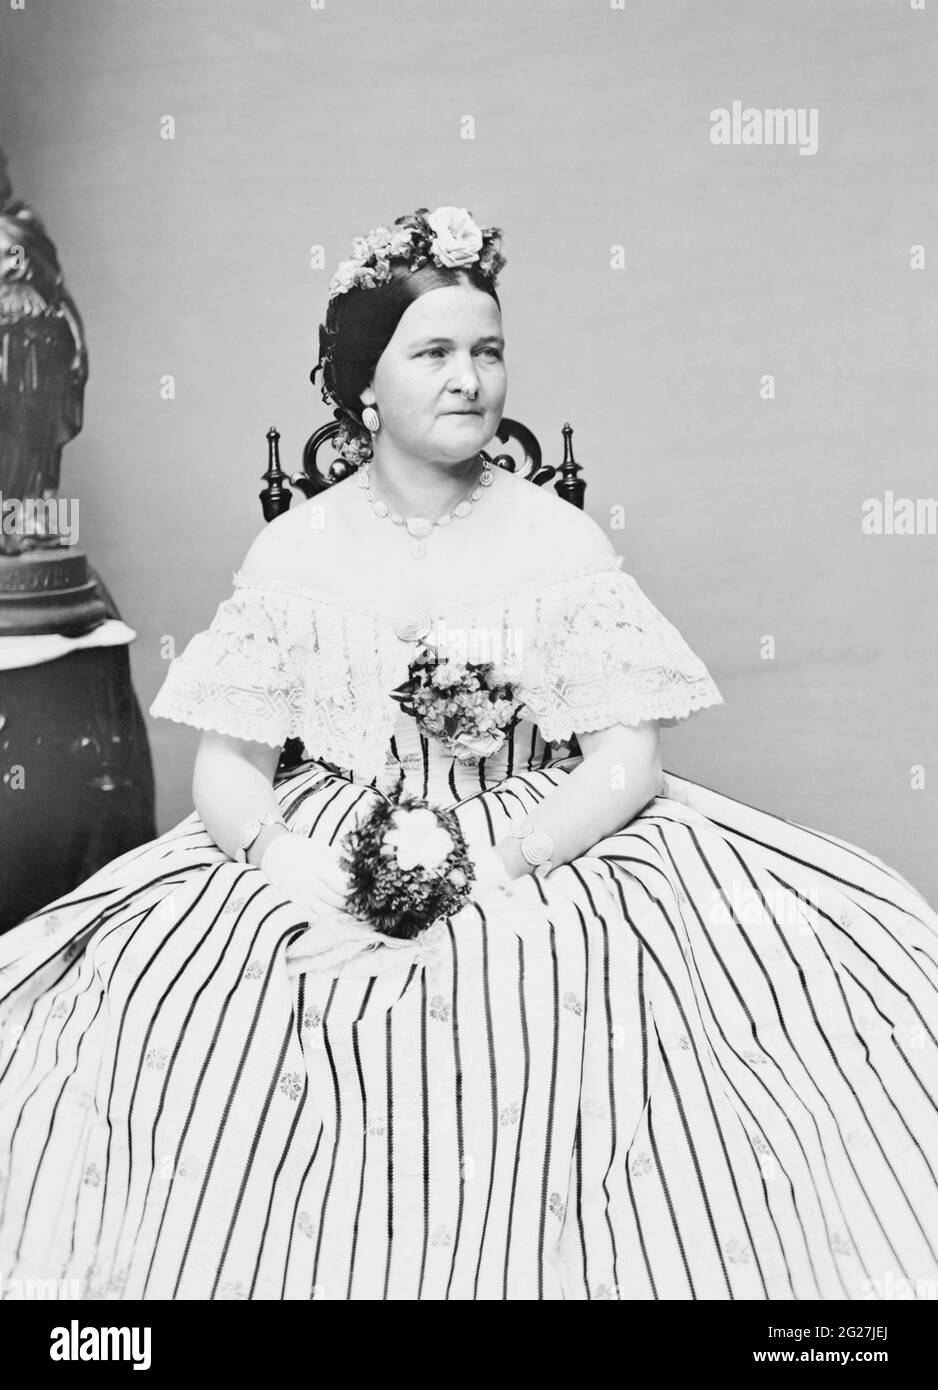 Porträt der First Lady Mary Todd Lincoln im Reifrock, um 1861. Stockfoto